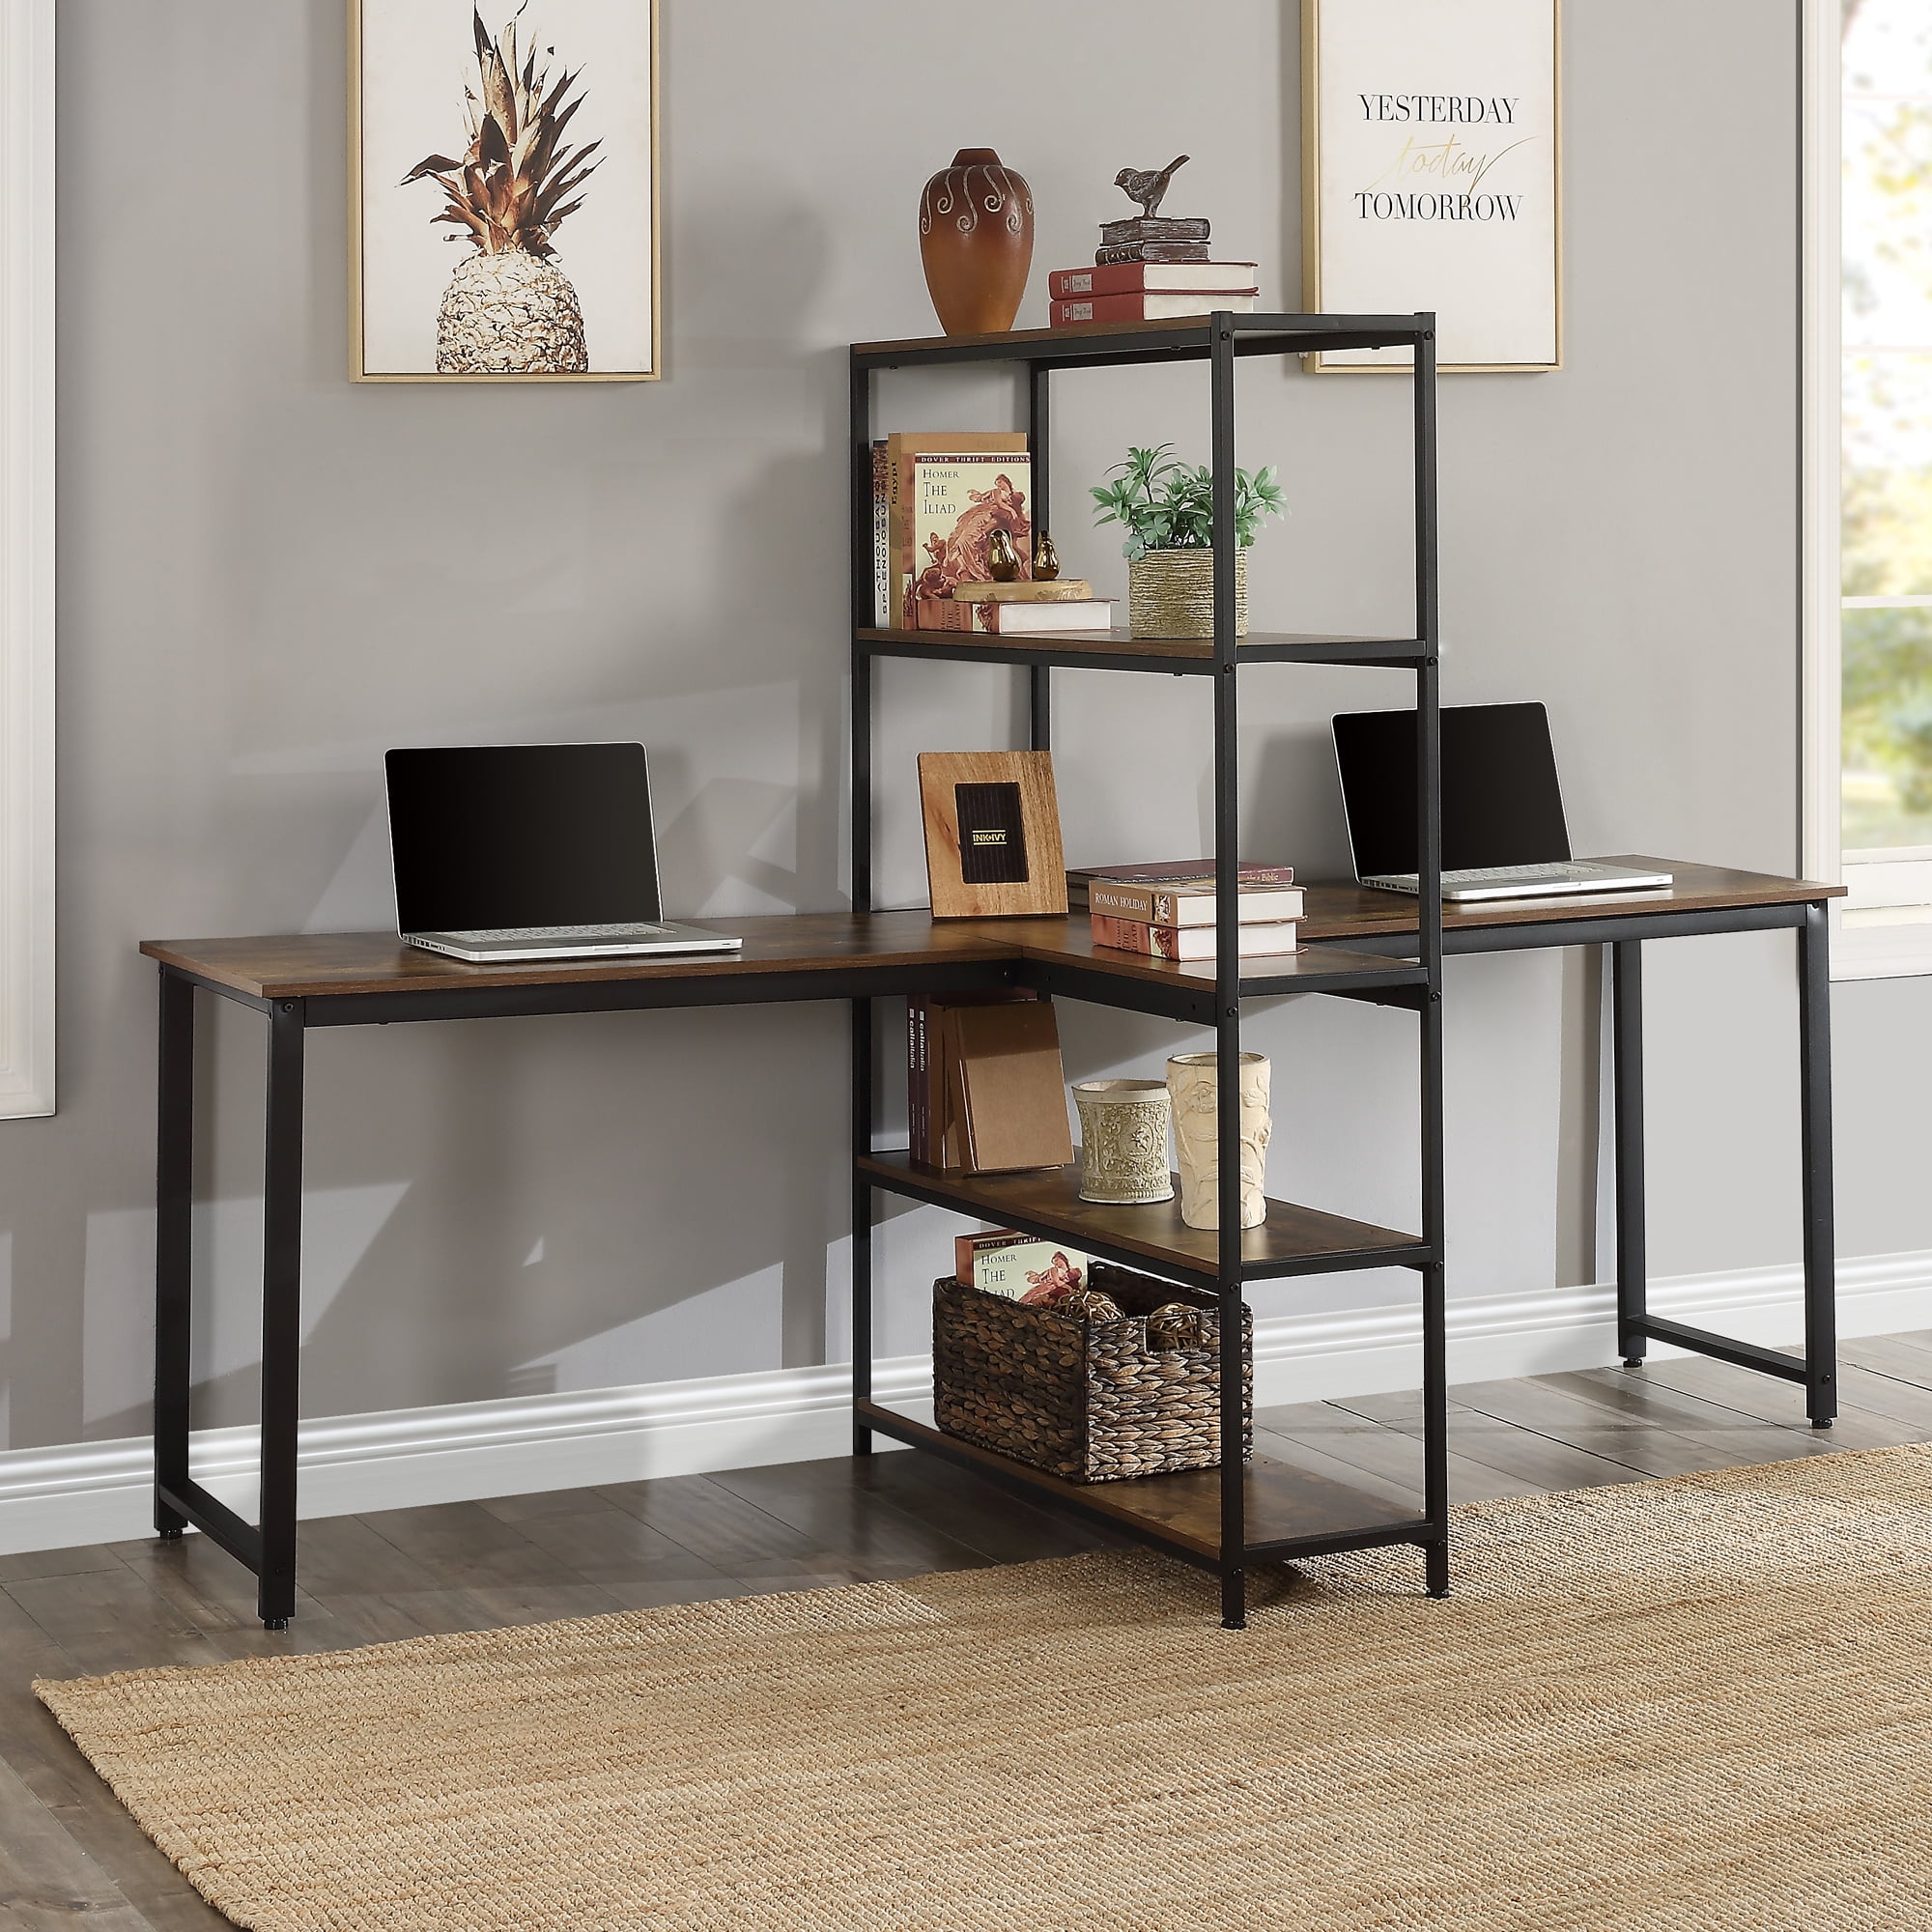 Laptop Table Study Desk Rustic Brown Brown, 47 inch Metal Frame PC Table Adesi Computer Desk Home Office Writing Desk,Simple Modern Style Gamer